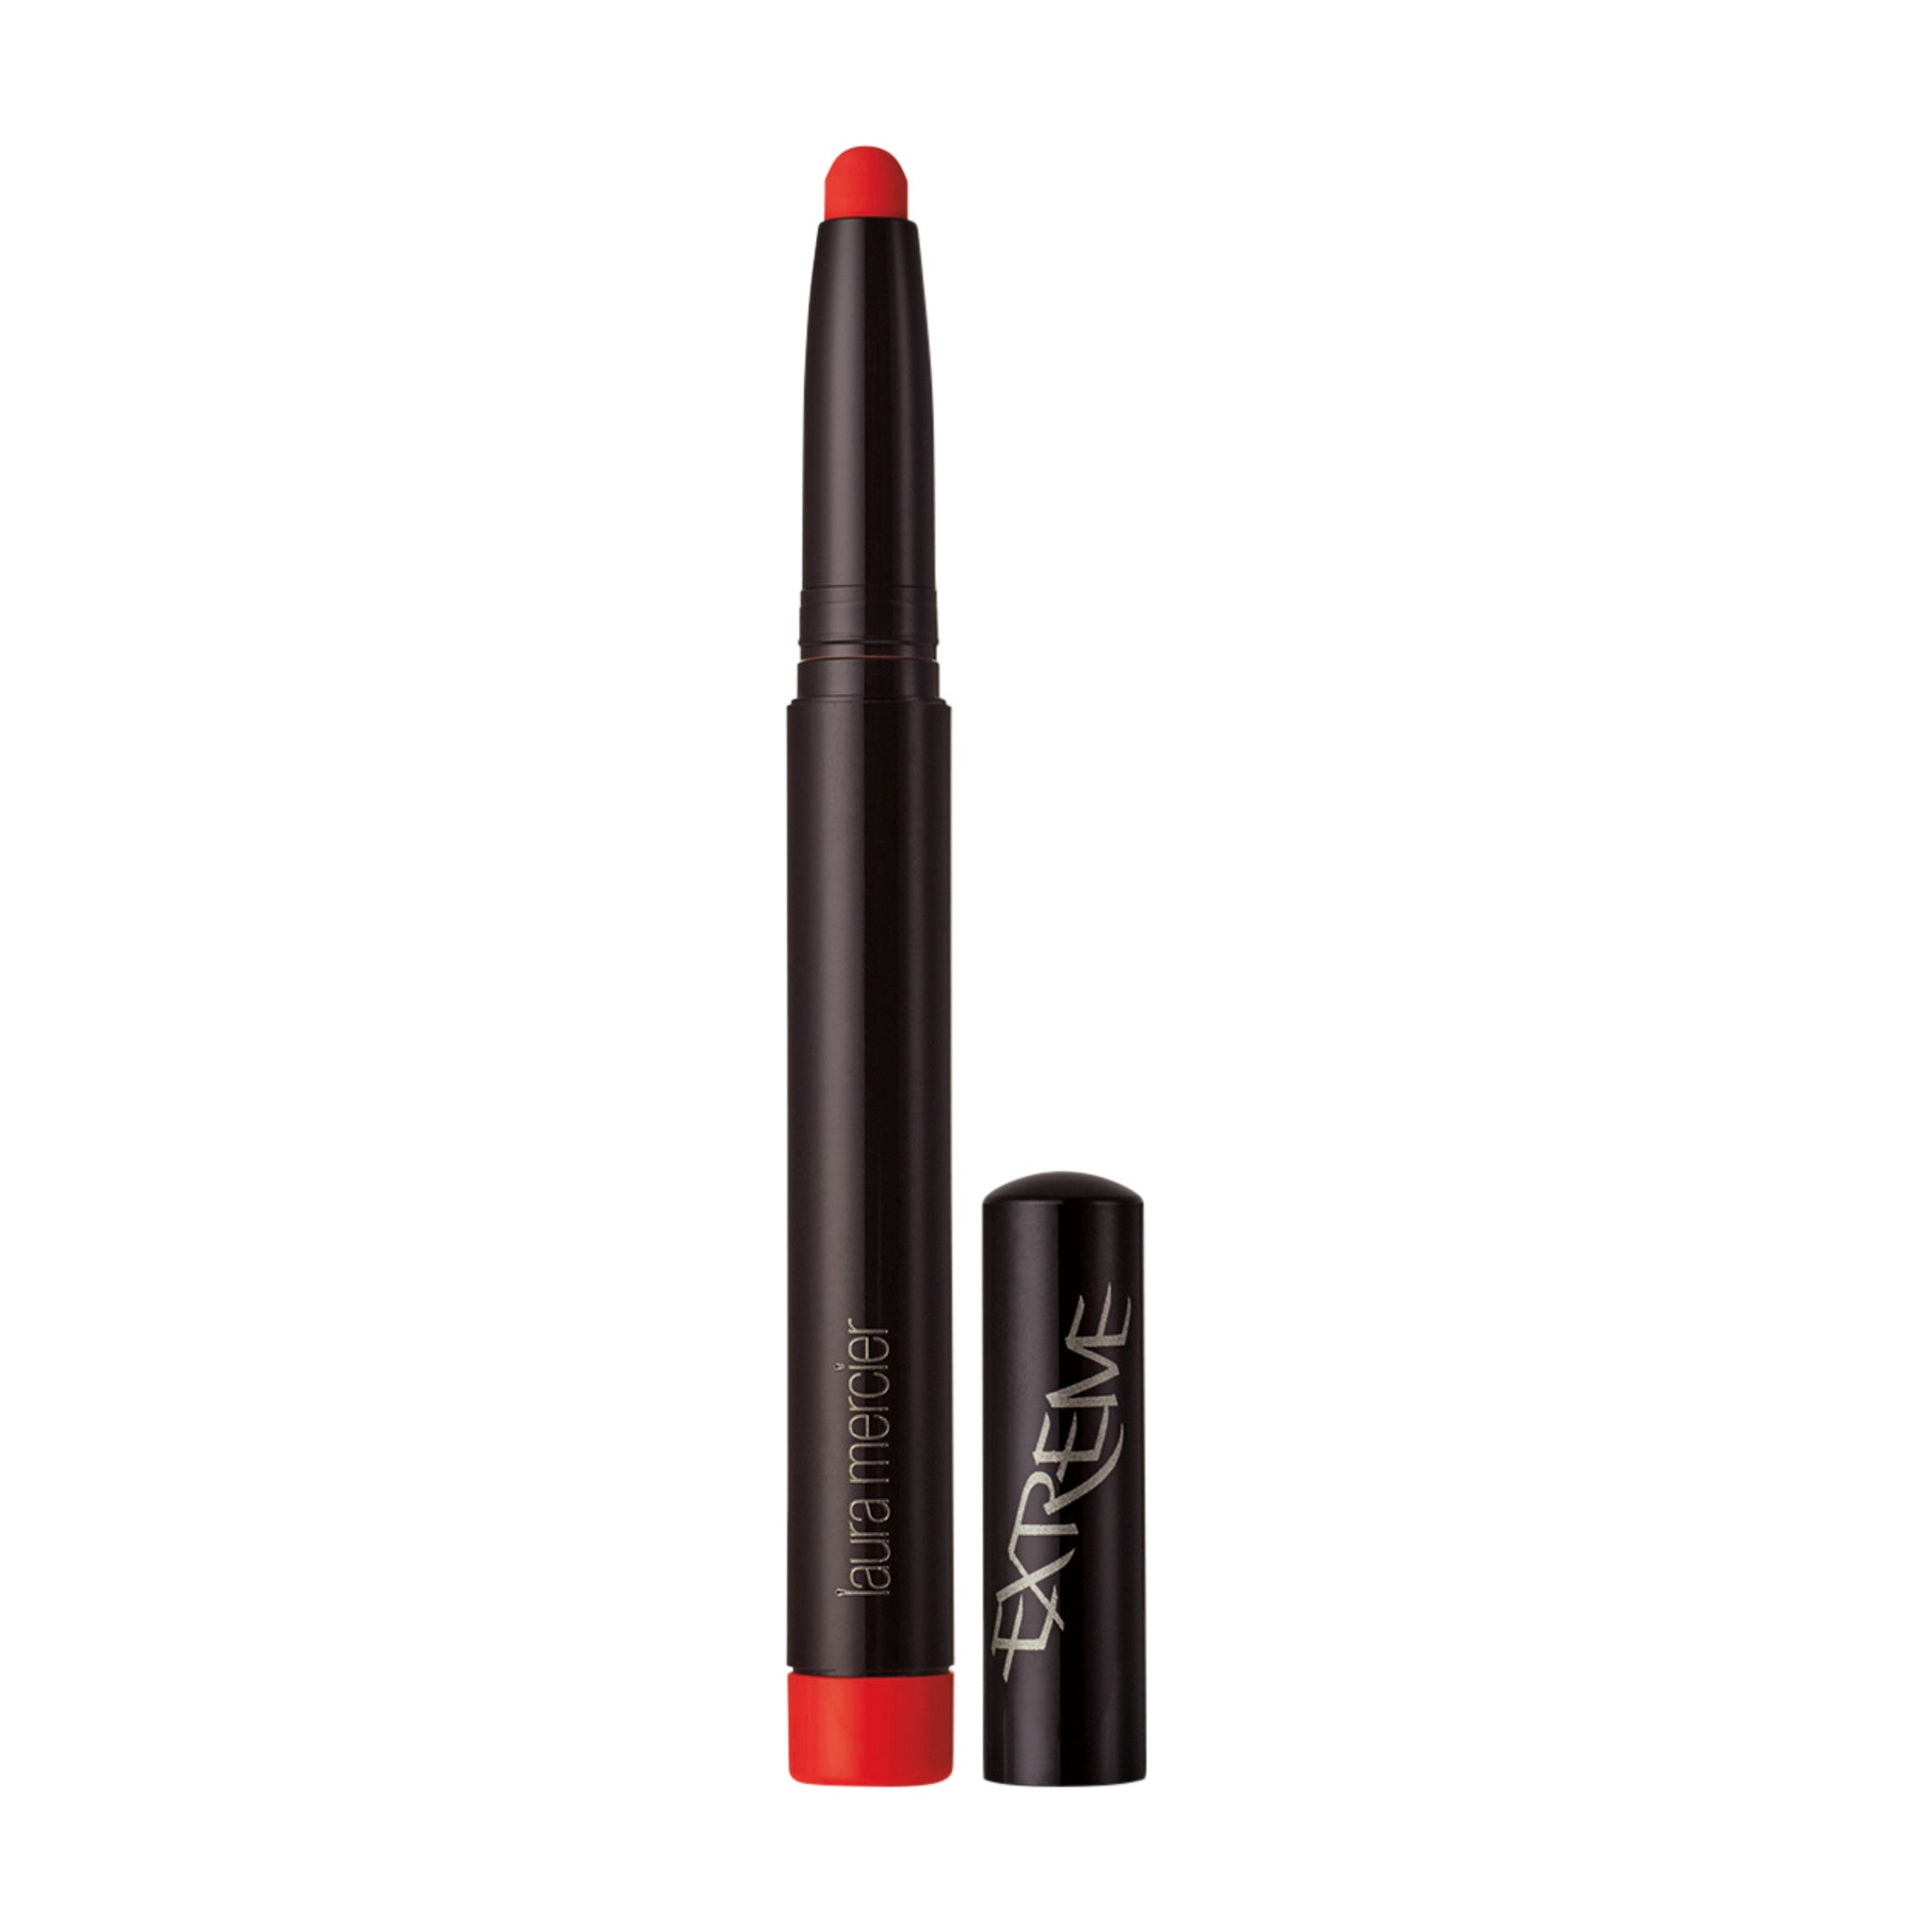 Laura Mercier Velour Extreme Matte Lipstick Color/Shade variant: Fire main image. This product is in the color red